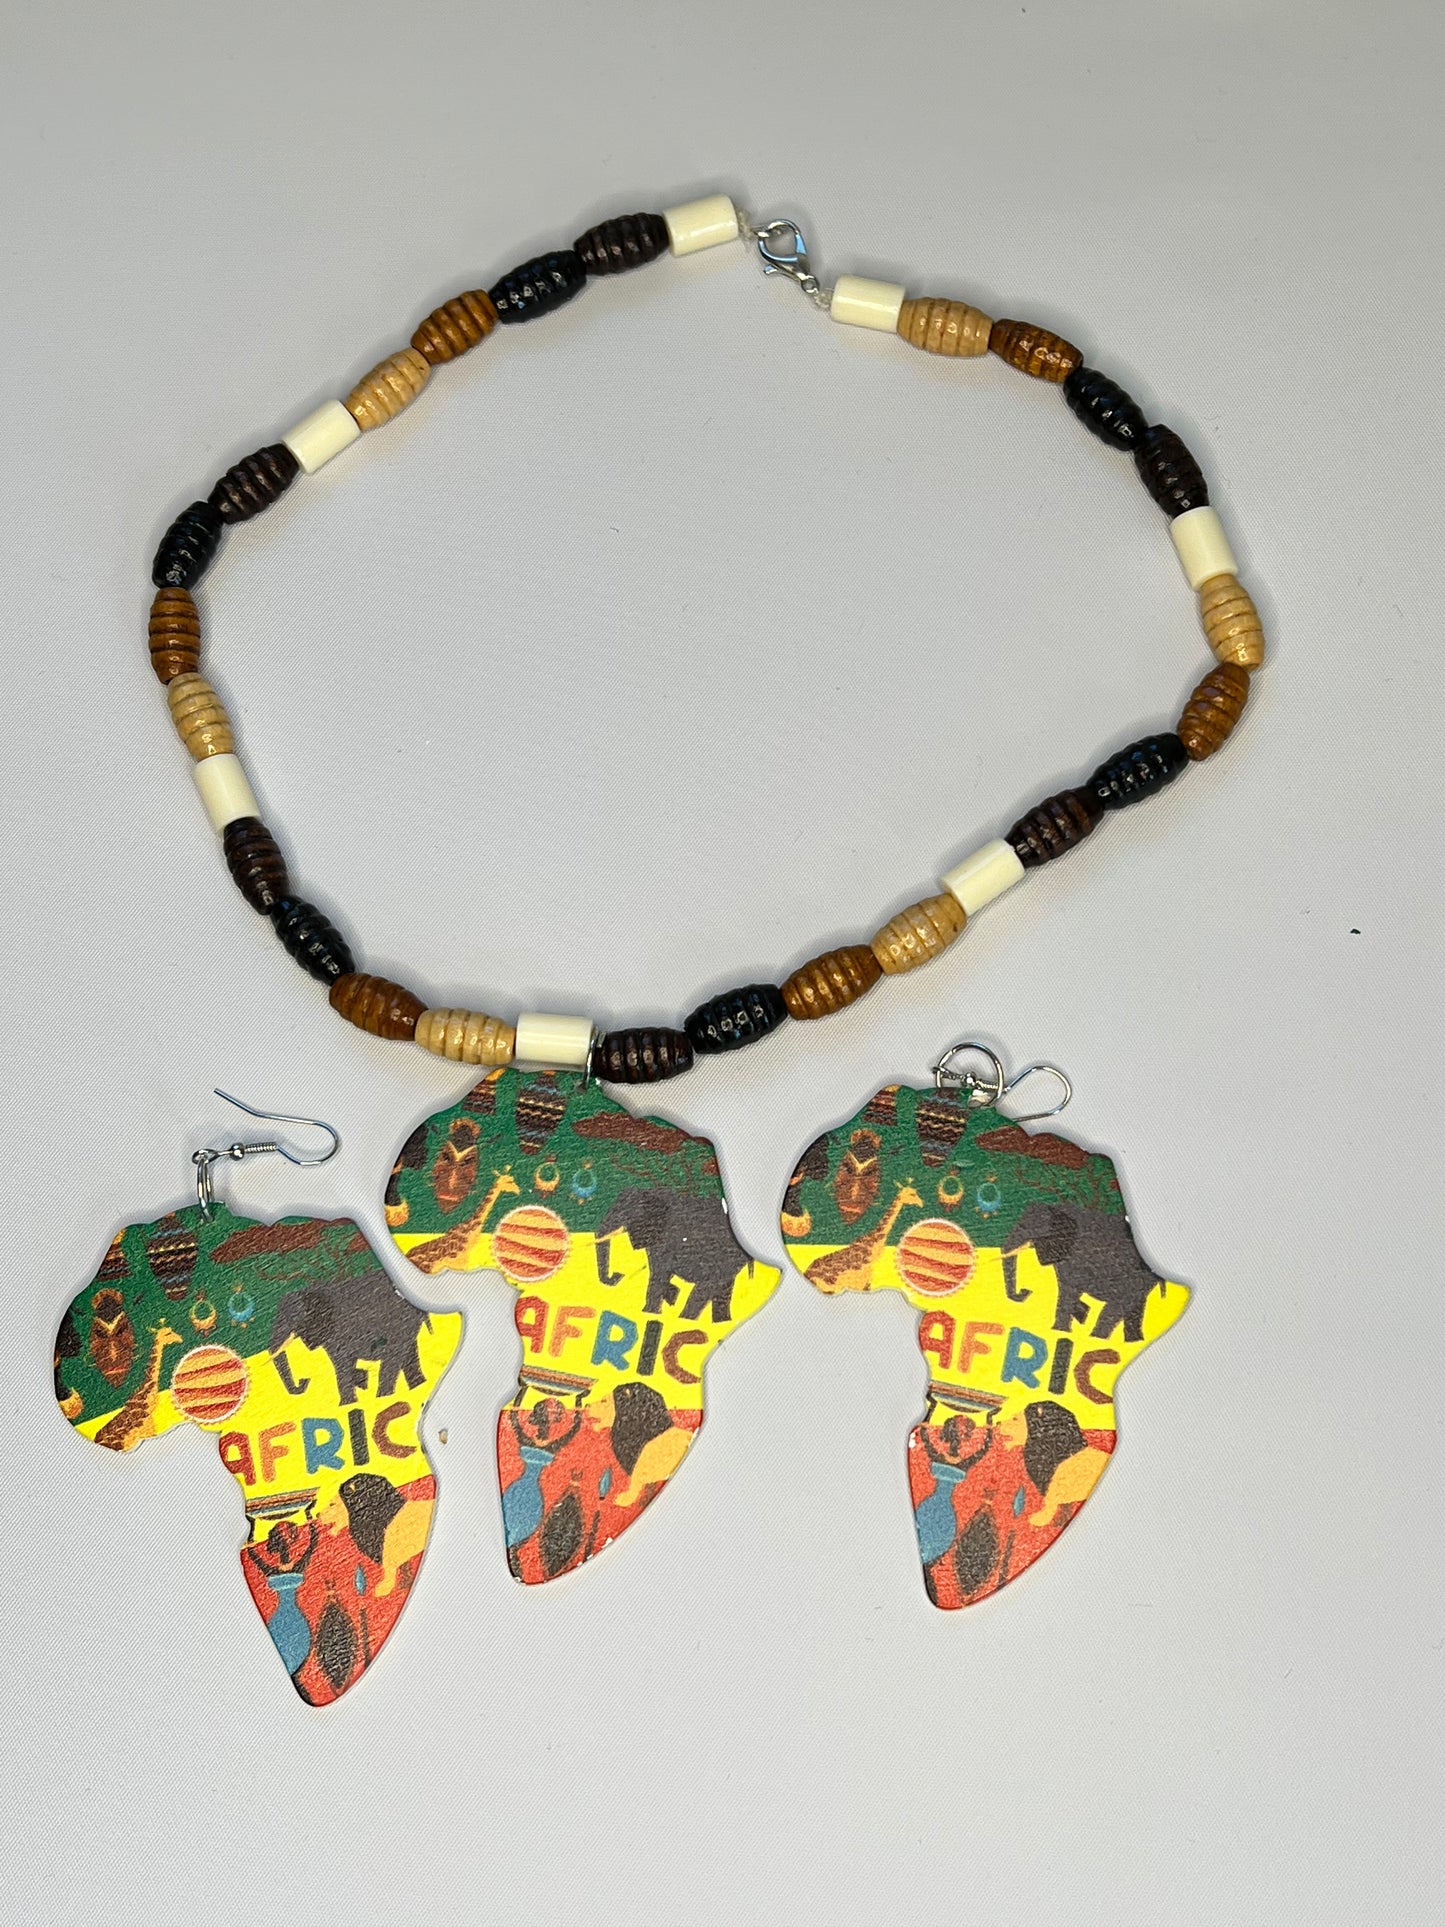 African Map jewelry